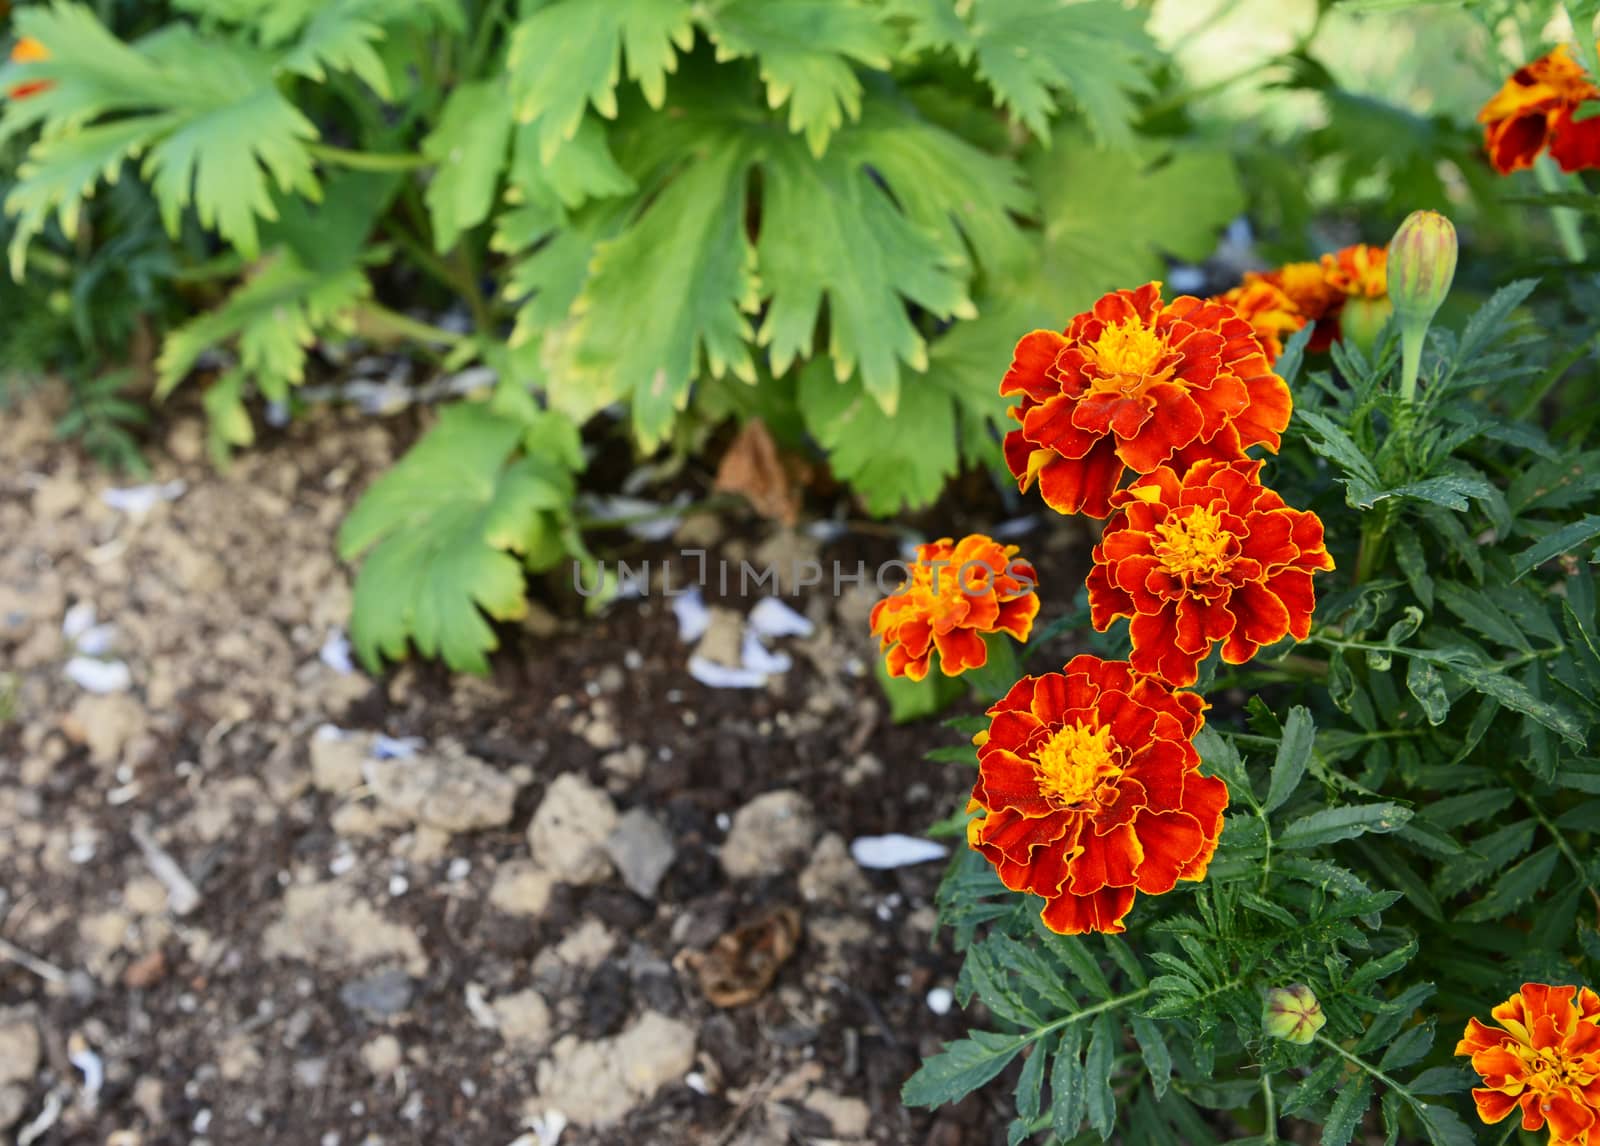 Red and yellow French marigolds with dark green foliage by sarahdoow